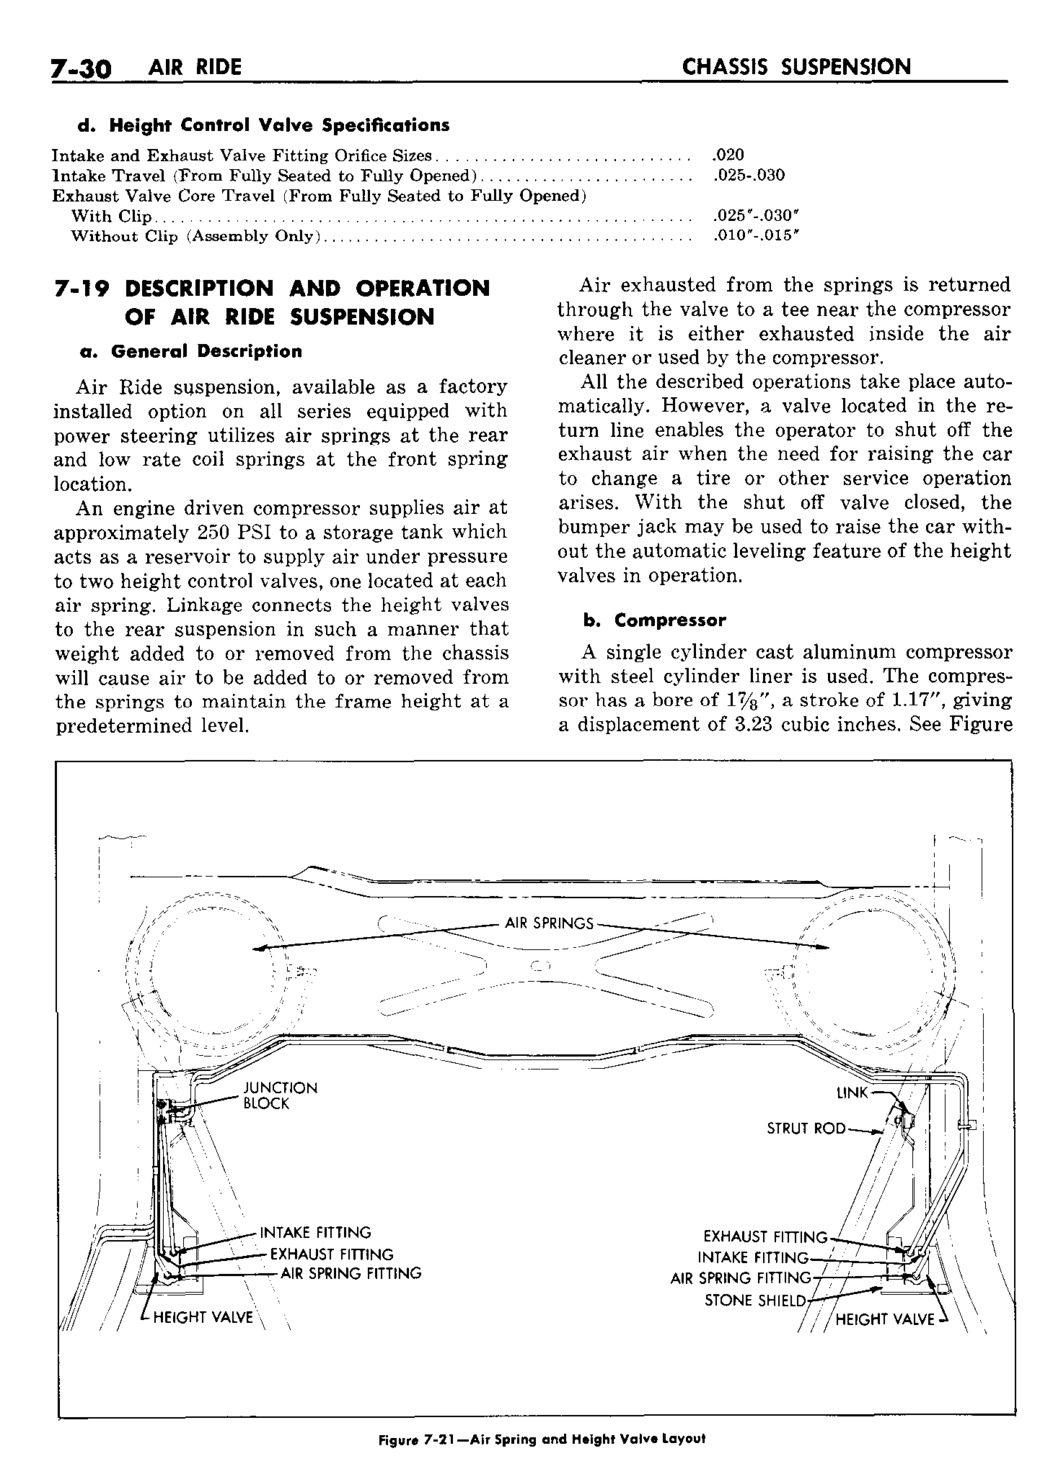 n_08 1959 Buick Shop Manual - Chassis Suspension-030-030.jpg